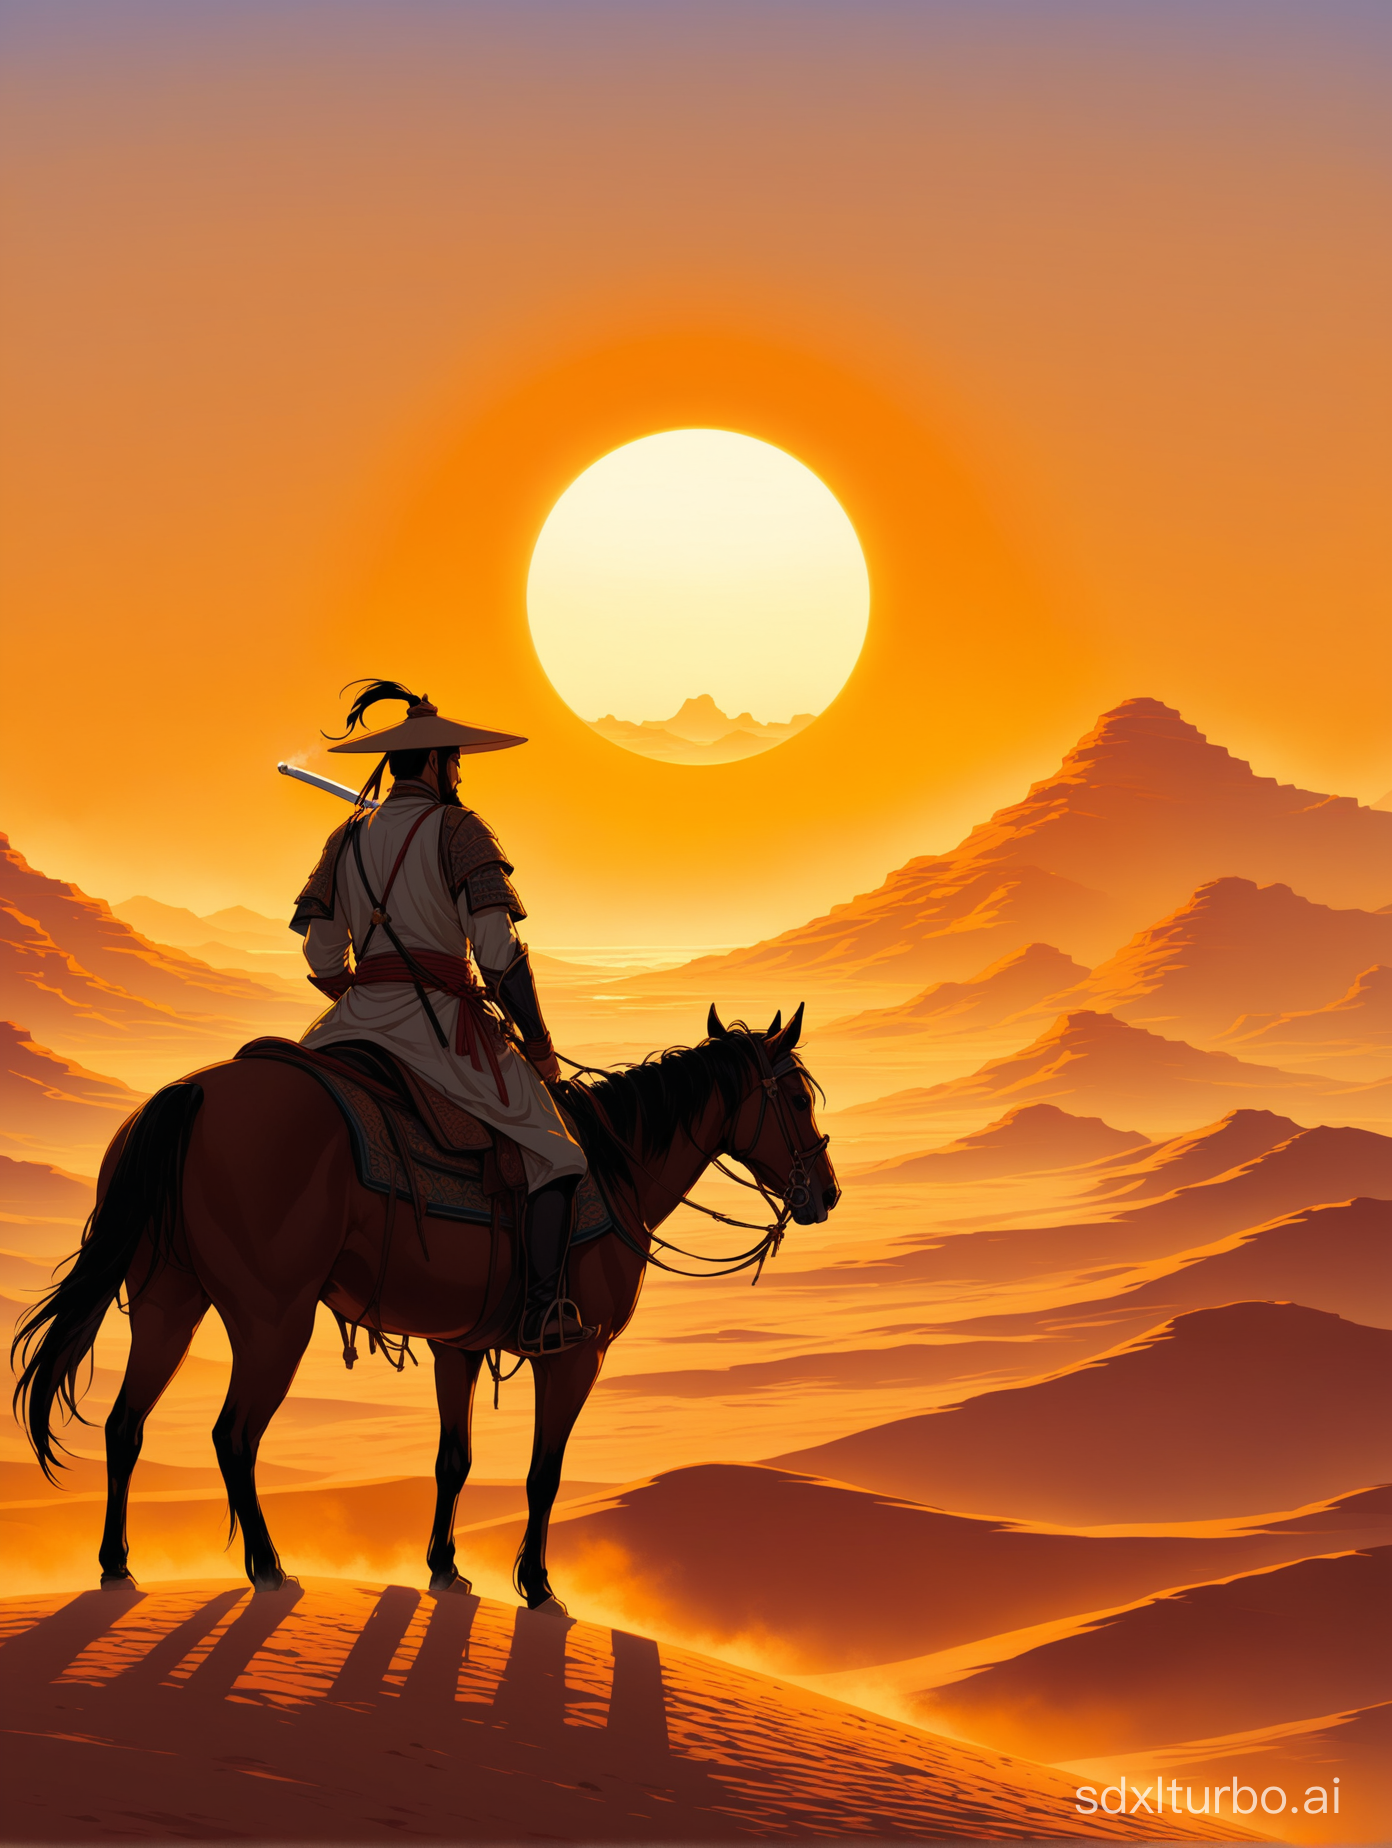 In boundless desert lonely smokes rise straight;  the sun sinks round,A Chinese swordsman on horseback looks out at the sunset